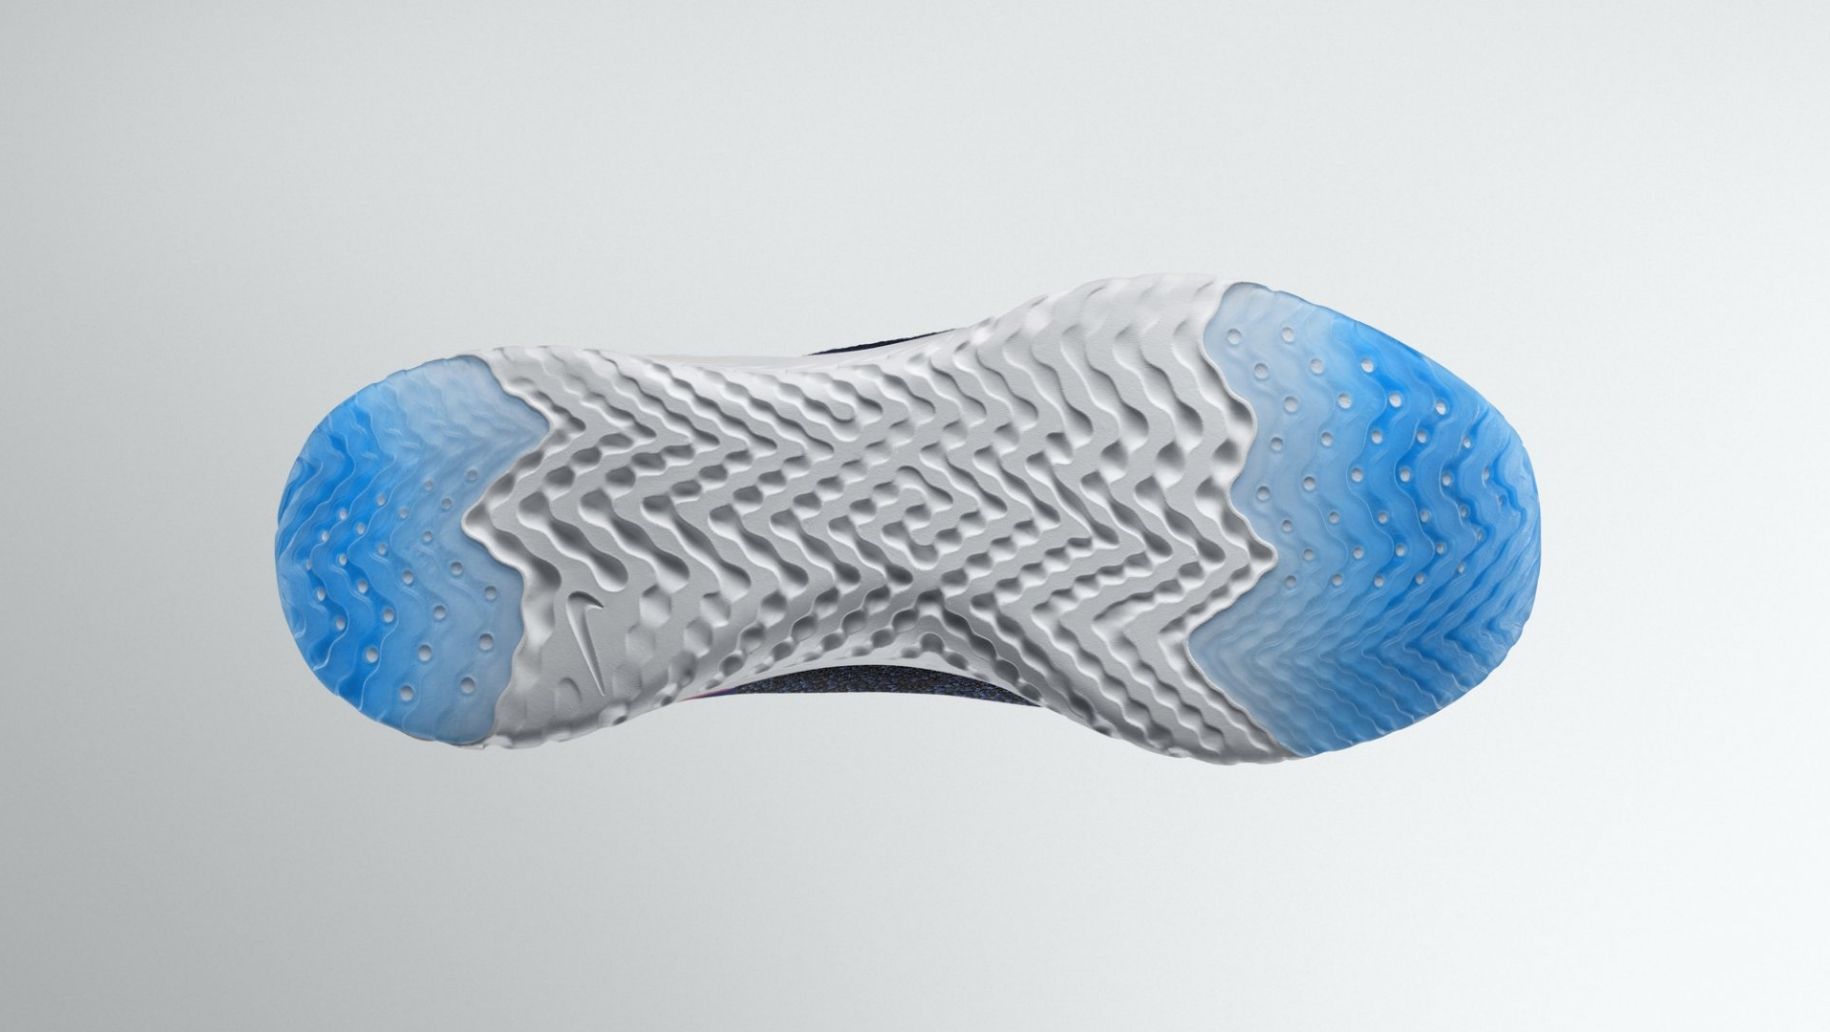 Nike Epic running shoe sole bottom view showing air pockets at heel and toe